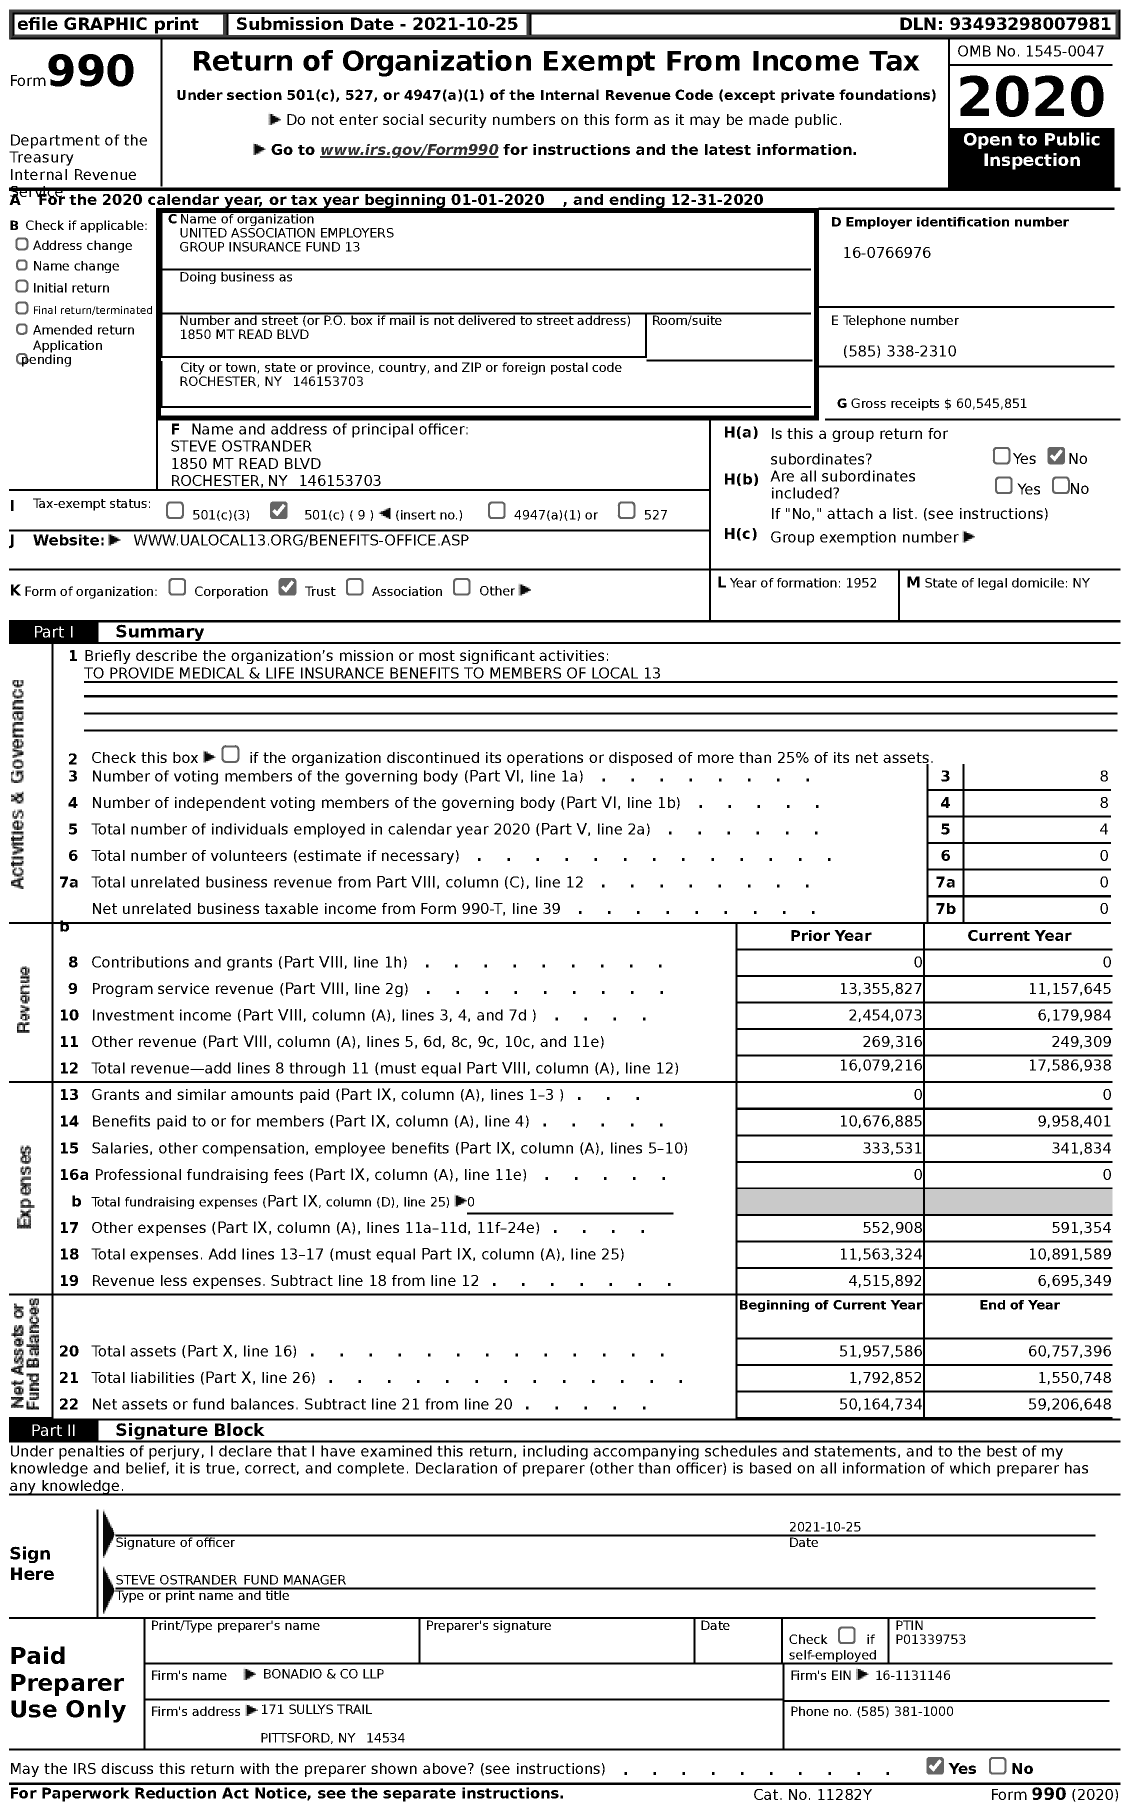 Image of first page of 2020 Form 990 for United Association Employers Group Insurance Fund 13